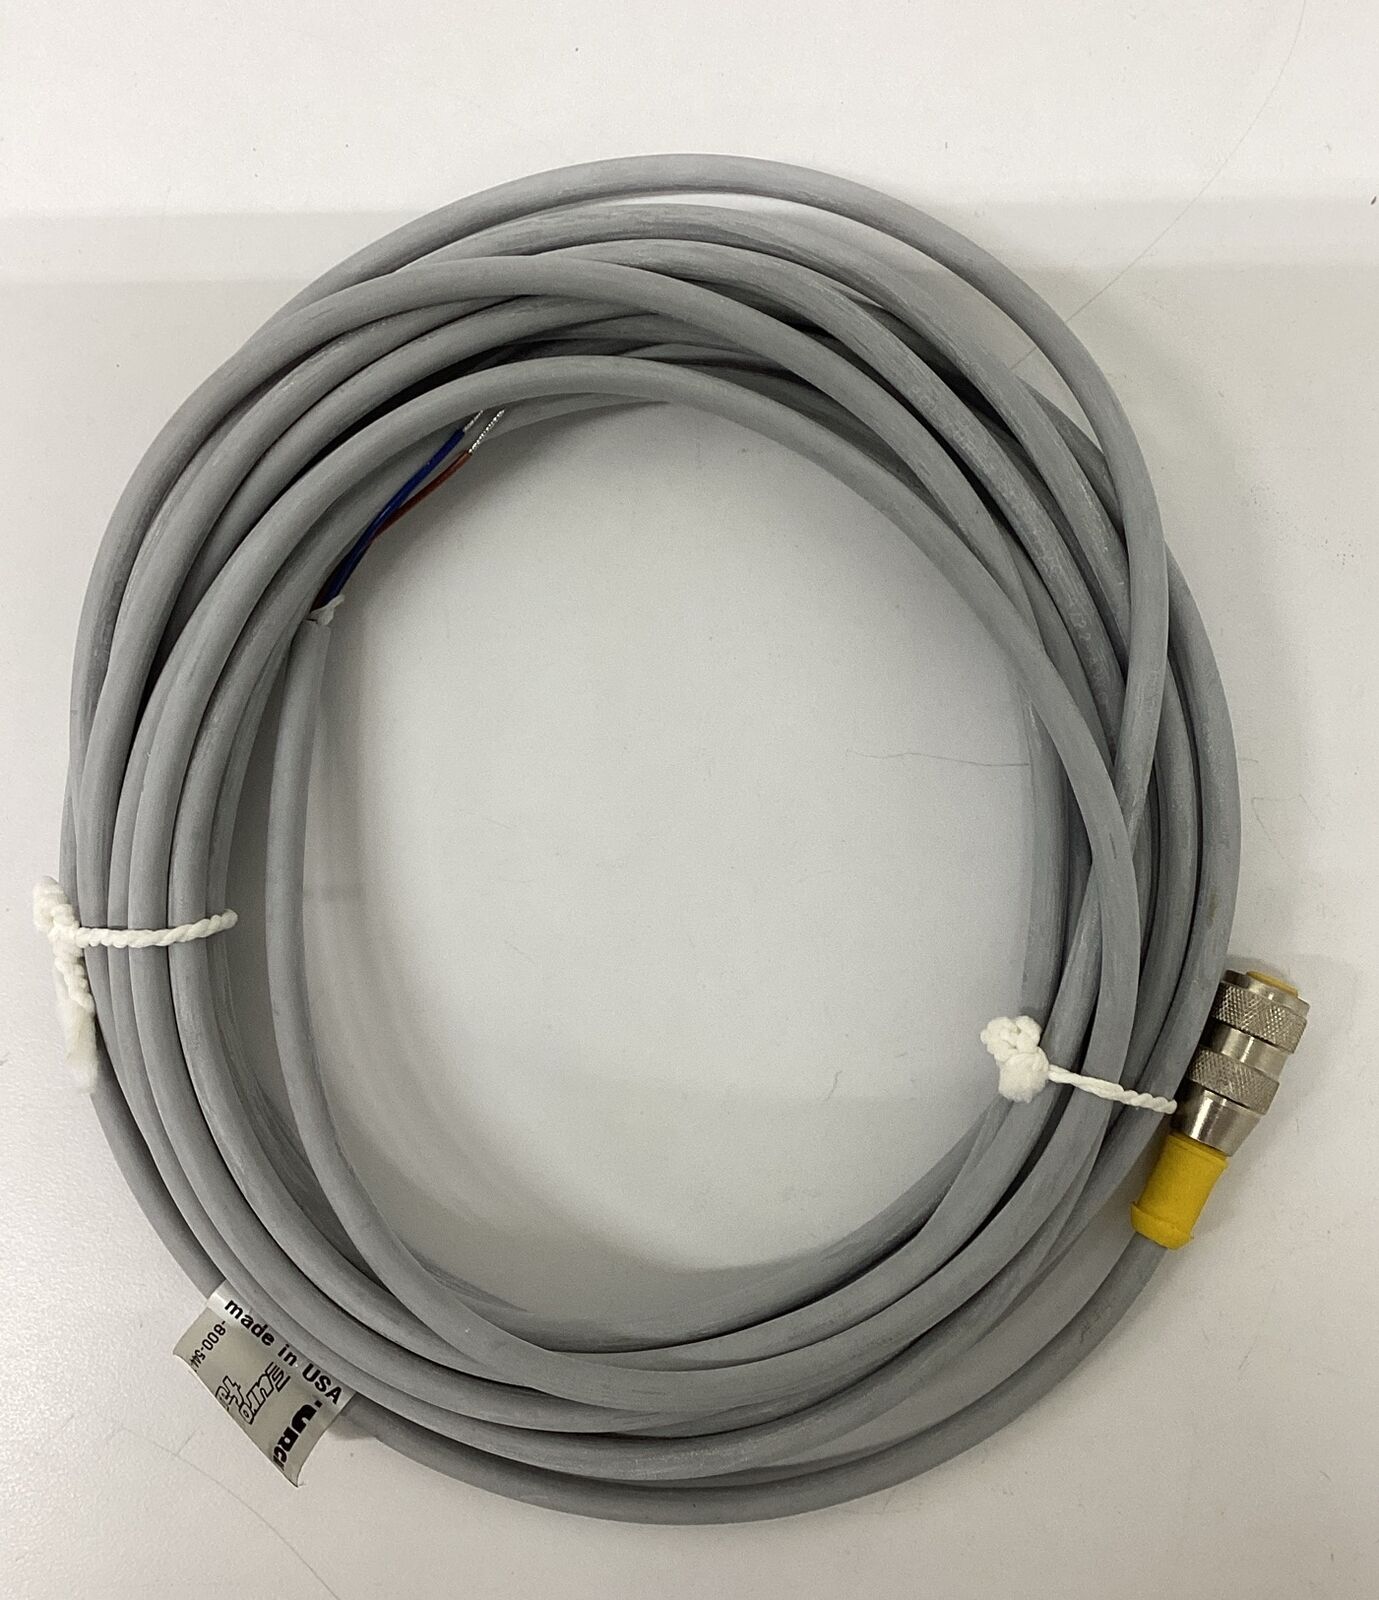 Turck RK4T-6/S90 / U2159-0 M12 3-Wire Straight Single End Cable 6M (RE148)